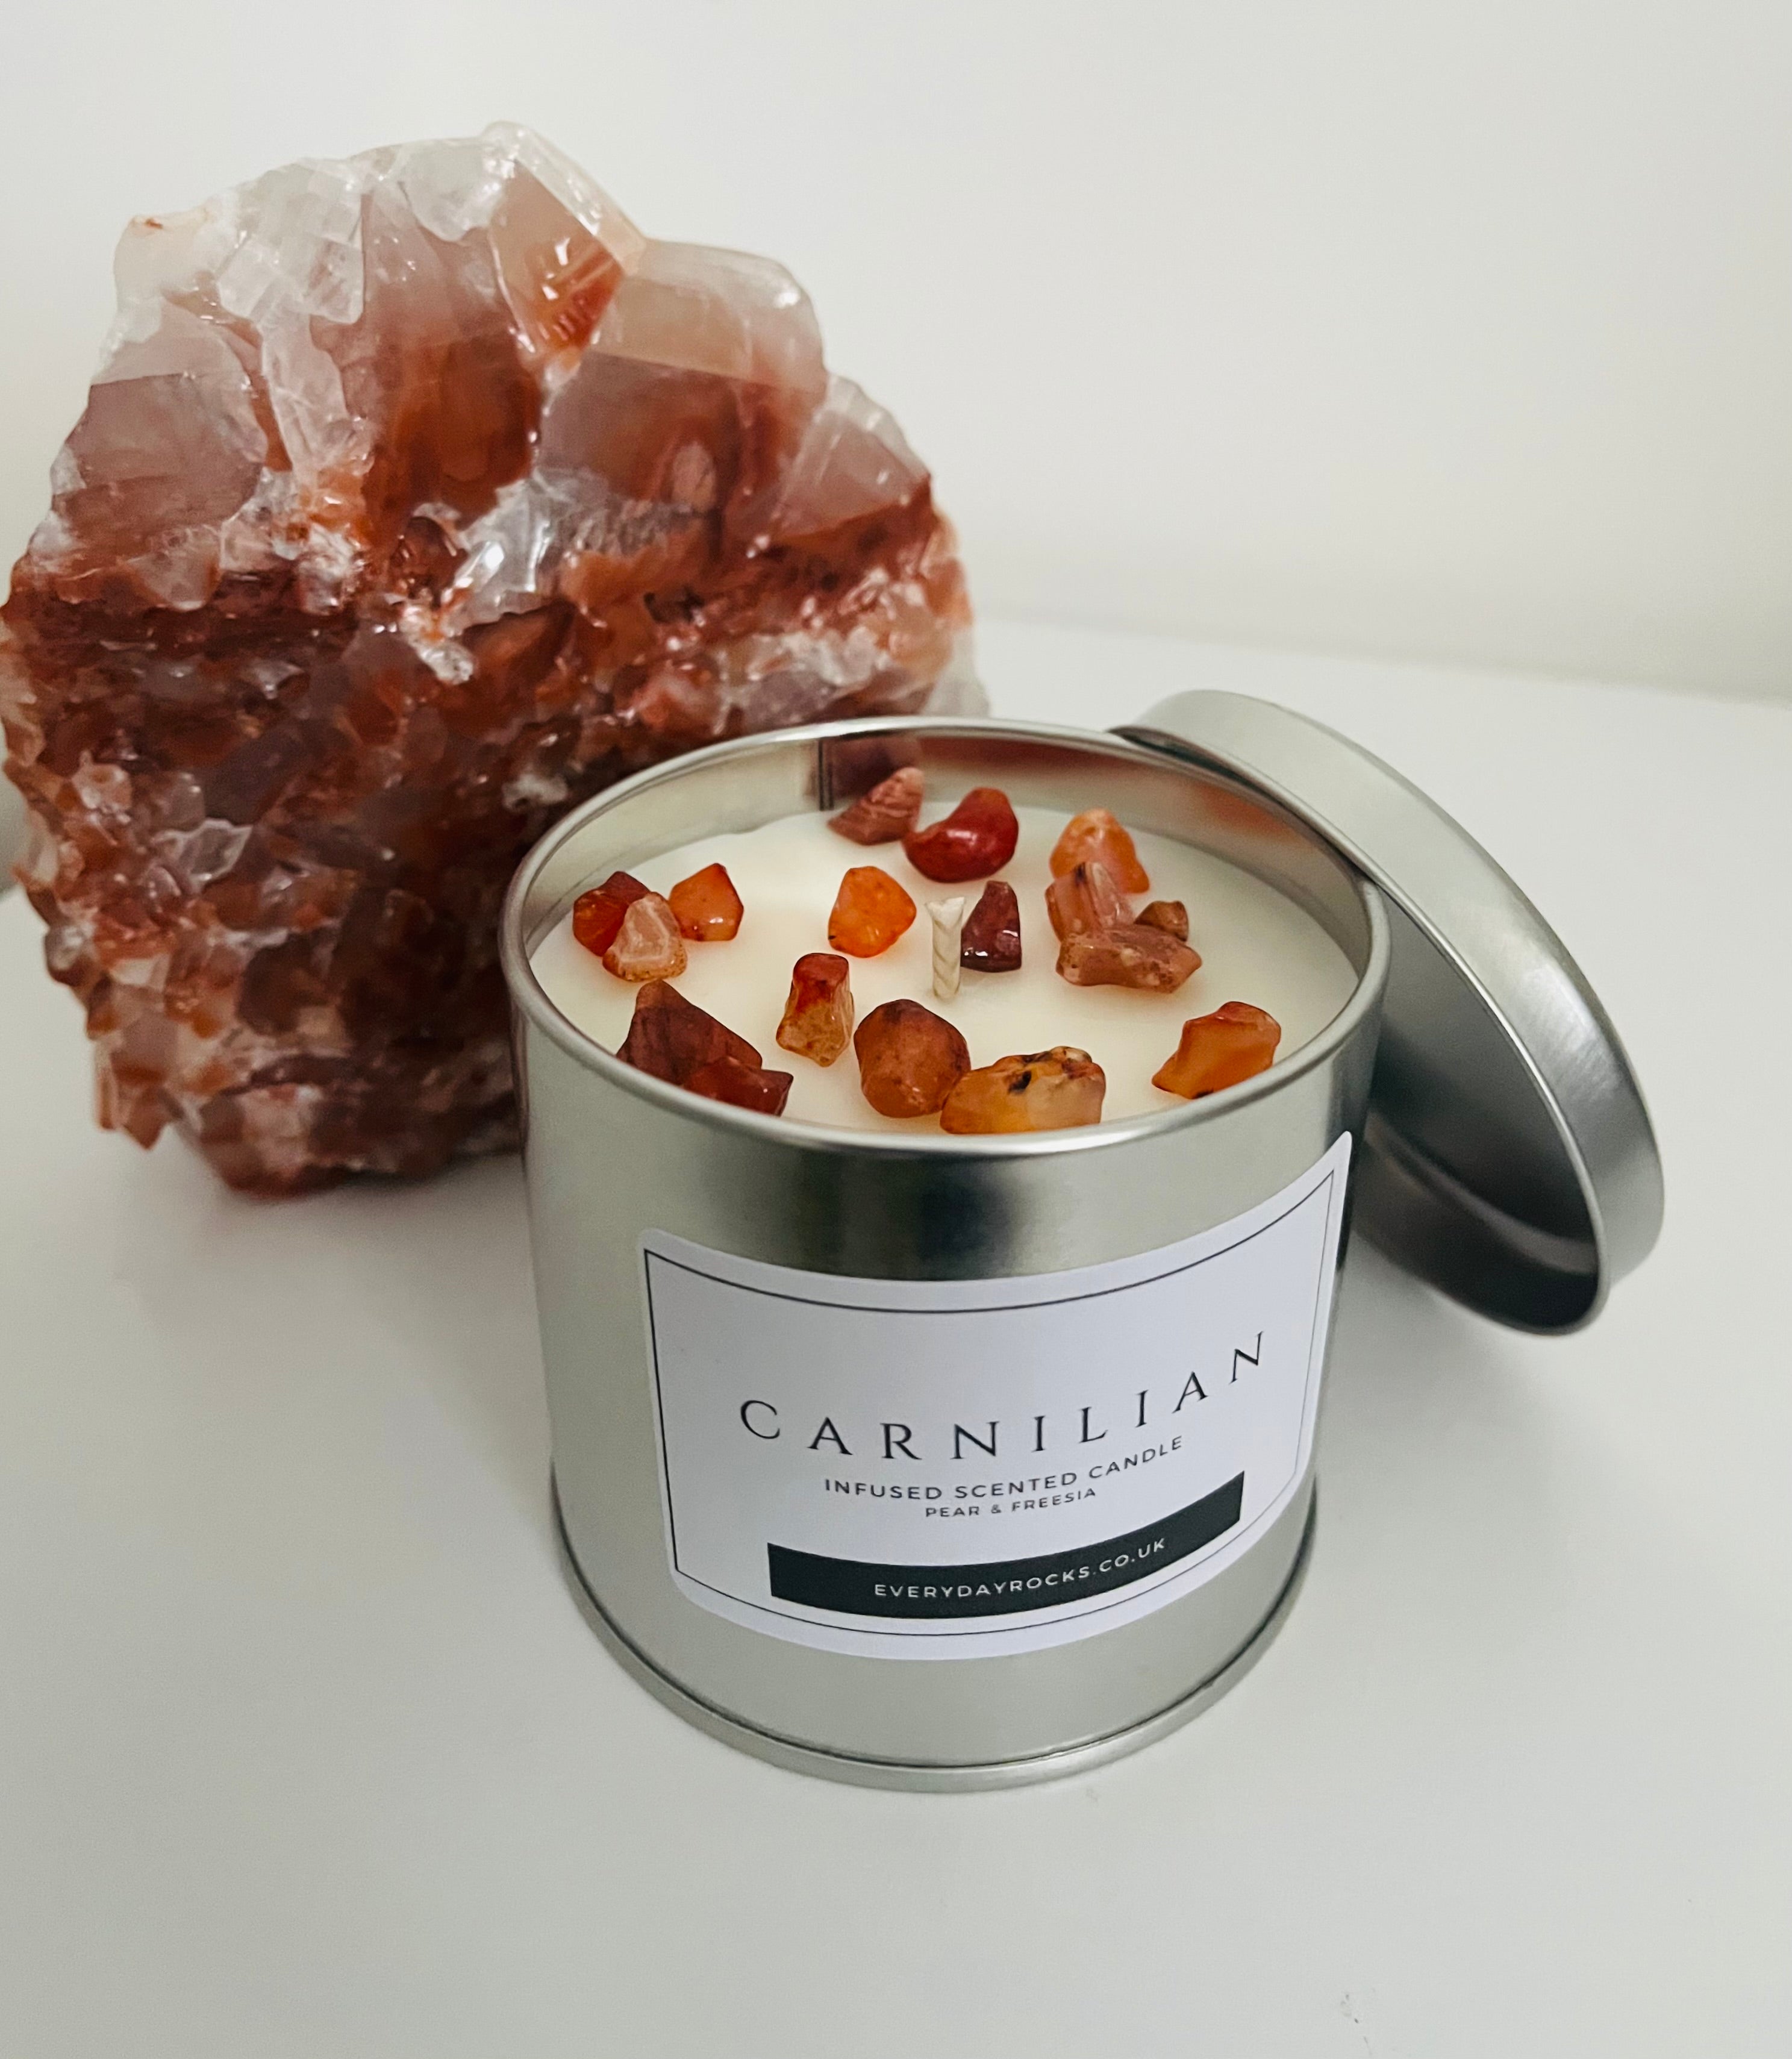 Carnelian Infused Scented Candle - Freesia and Pear Frangrance